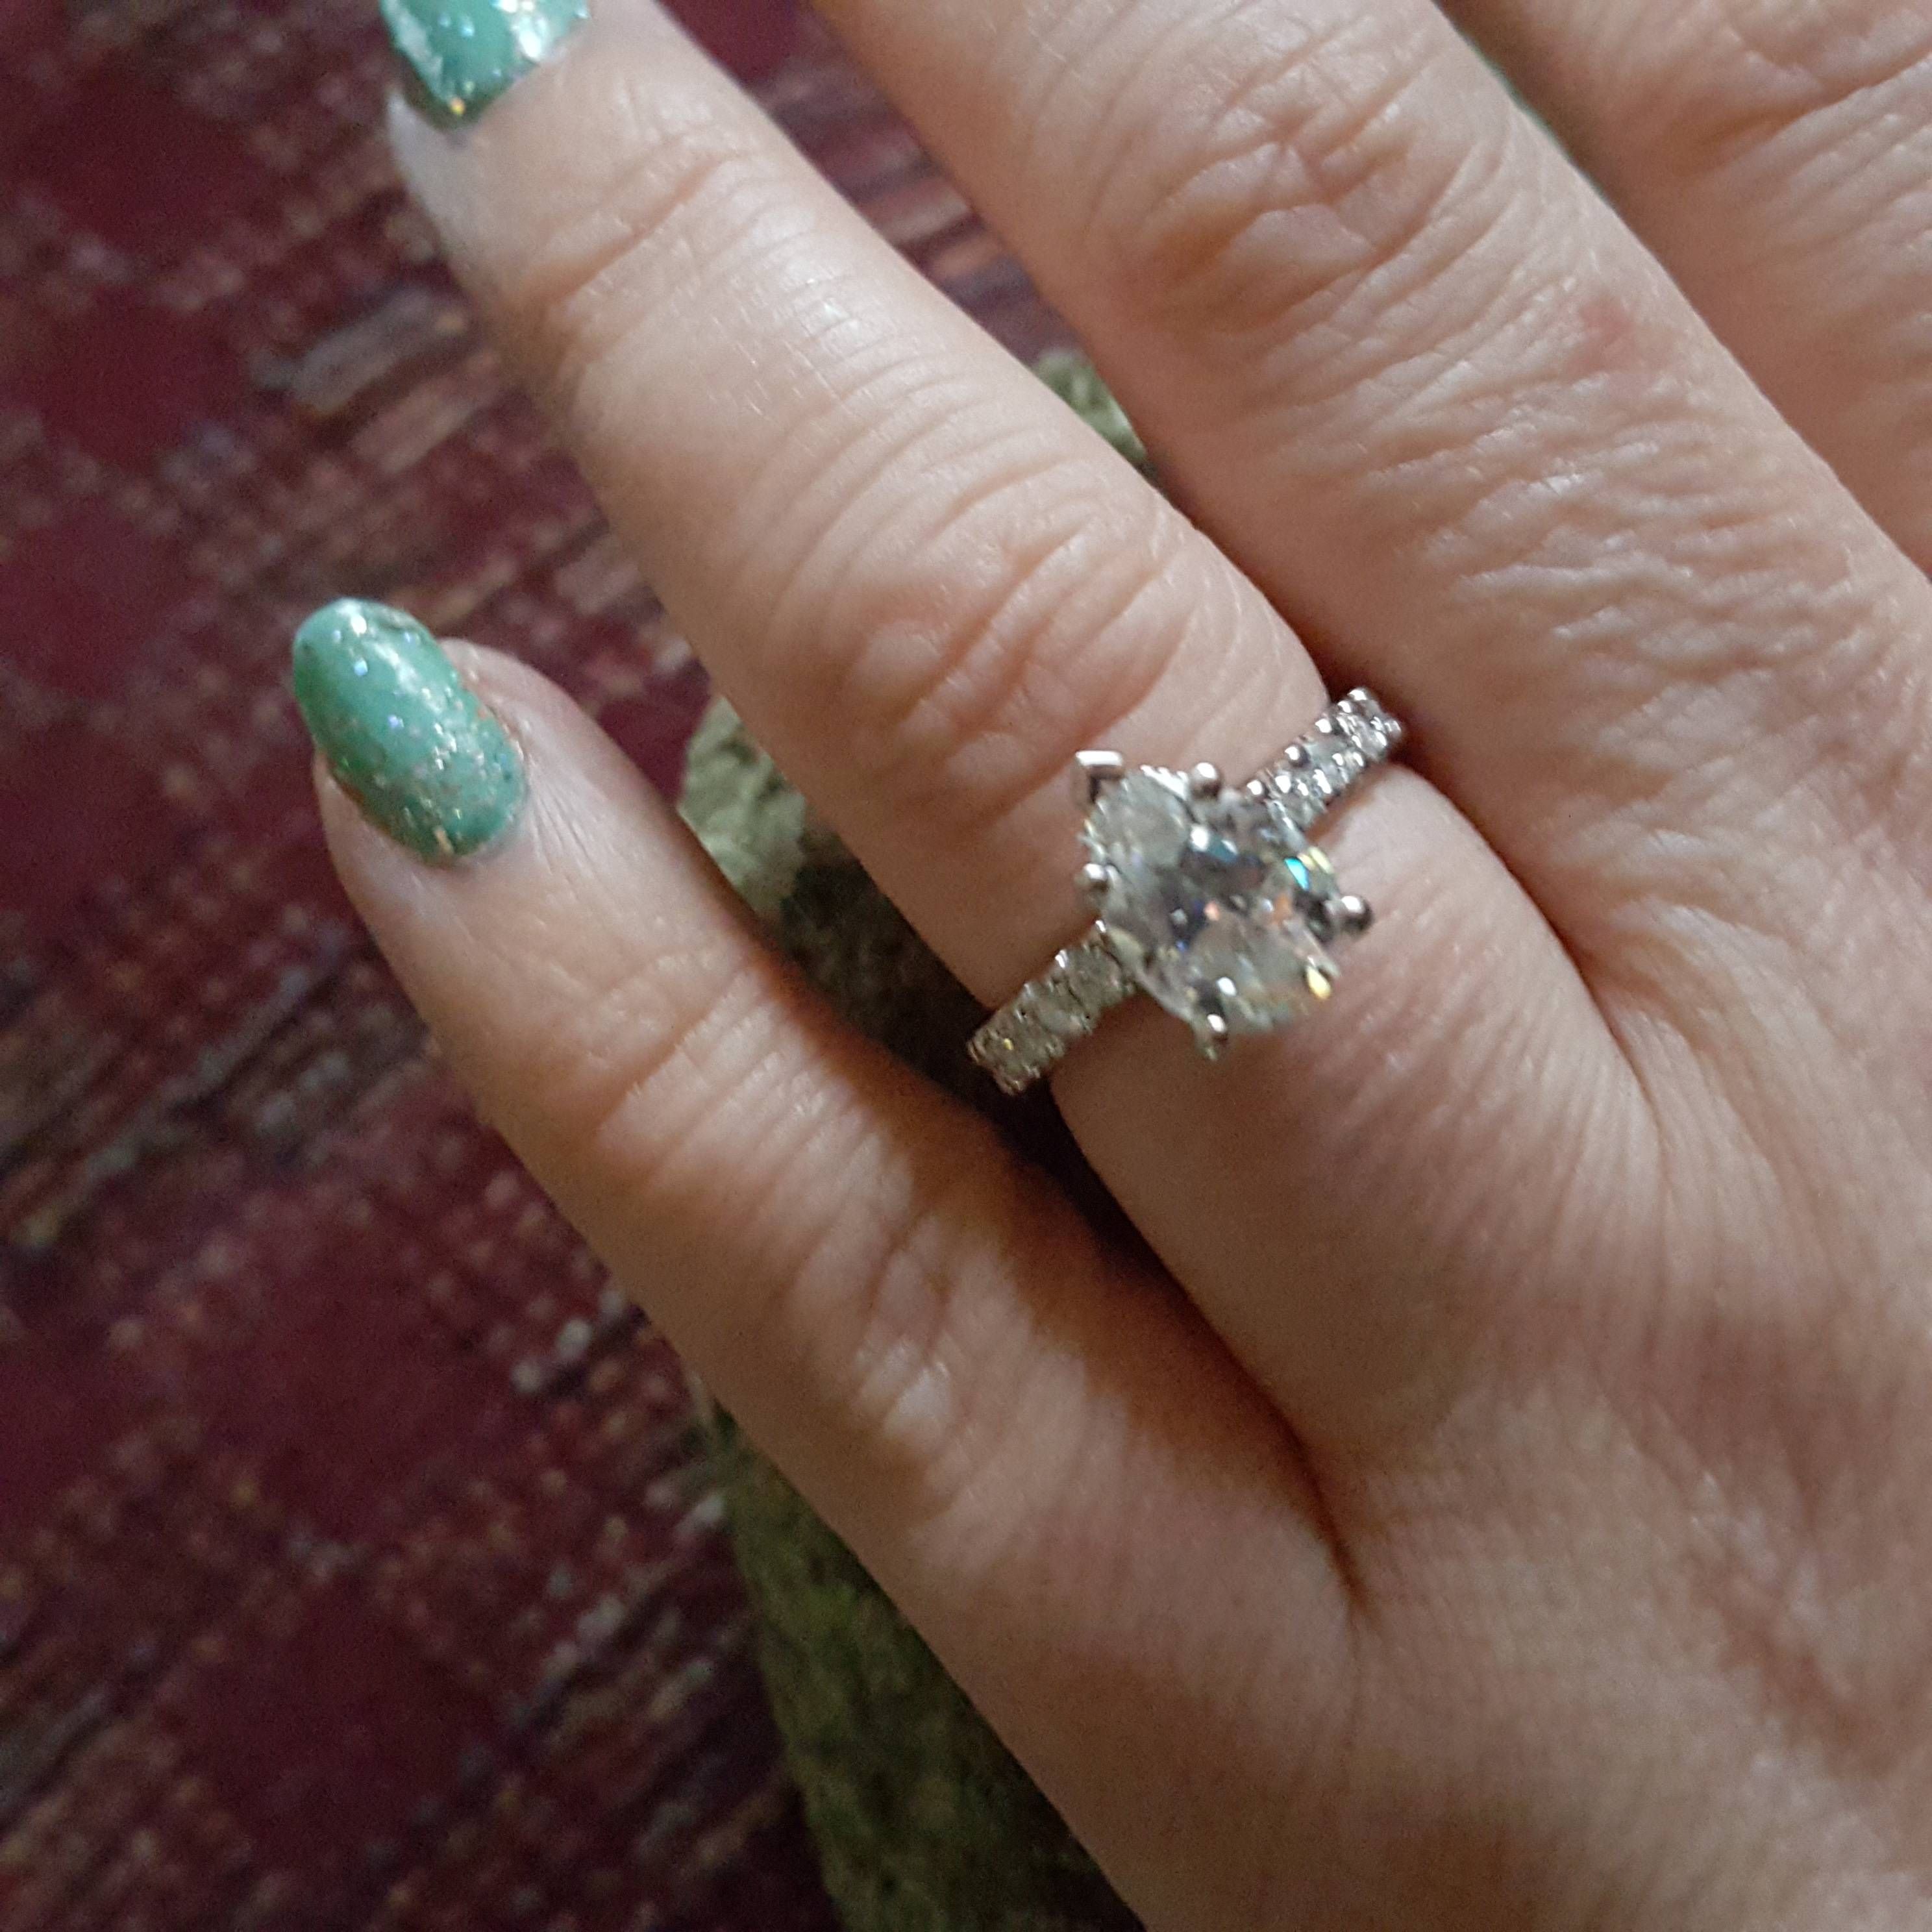 Show Off Your Flashy Engagement/wedding Rings! – Weddingbee For Flashy Wedding Rings (View 14 of 15)